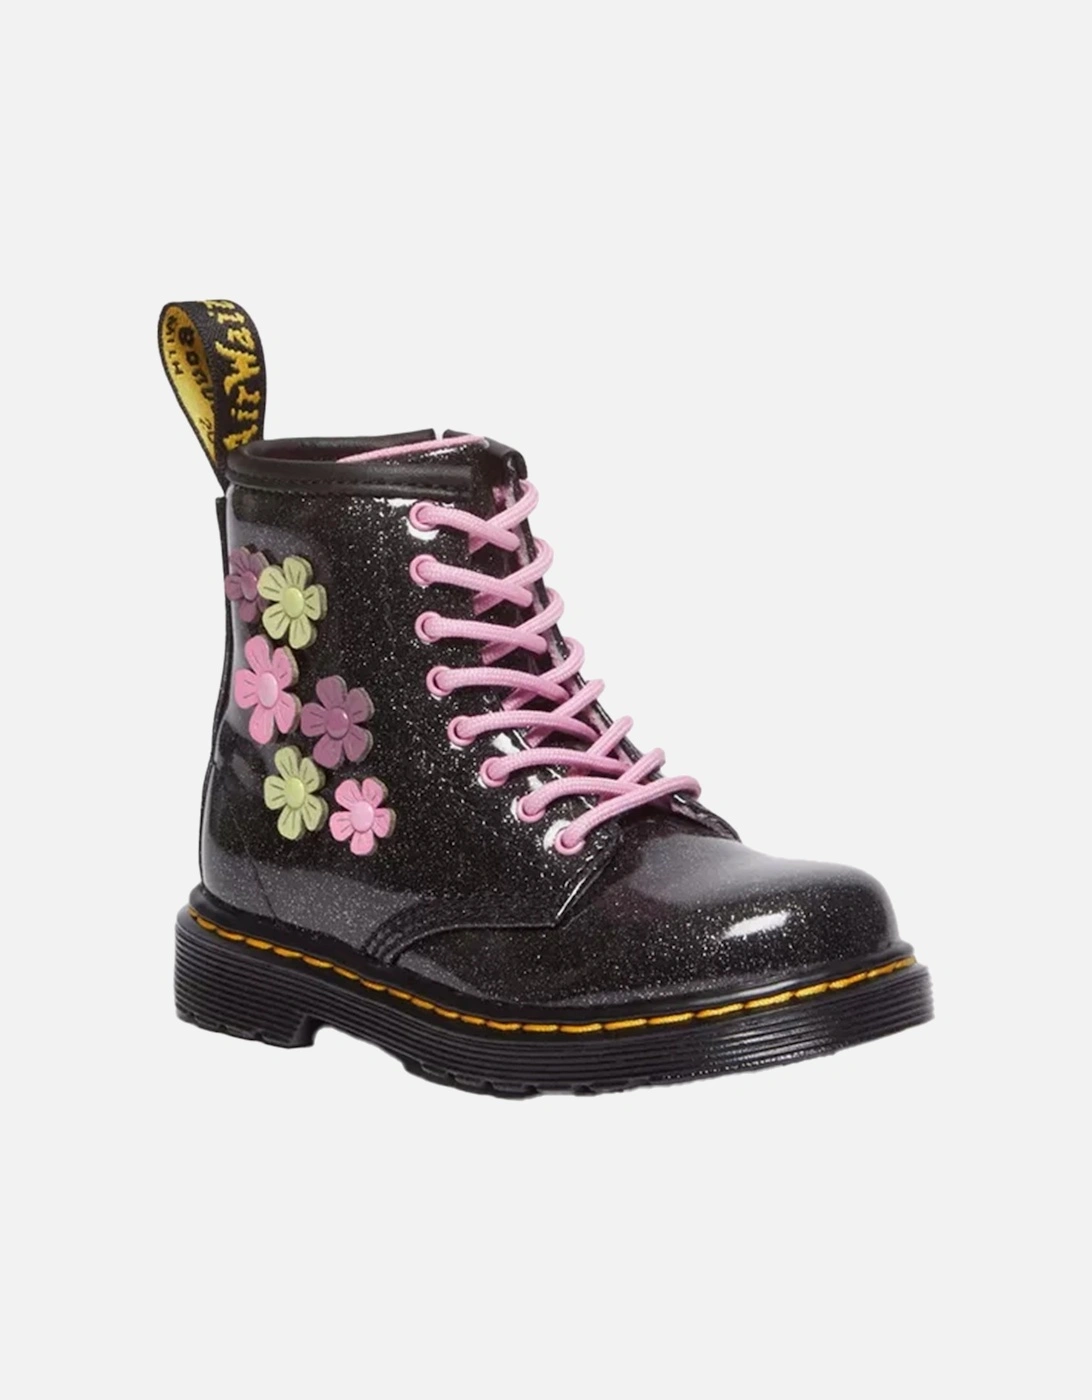 Dr. Martens Toddlers Gradient Glitter Boots (Black/Pink), 9 of 8